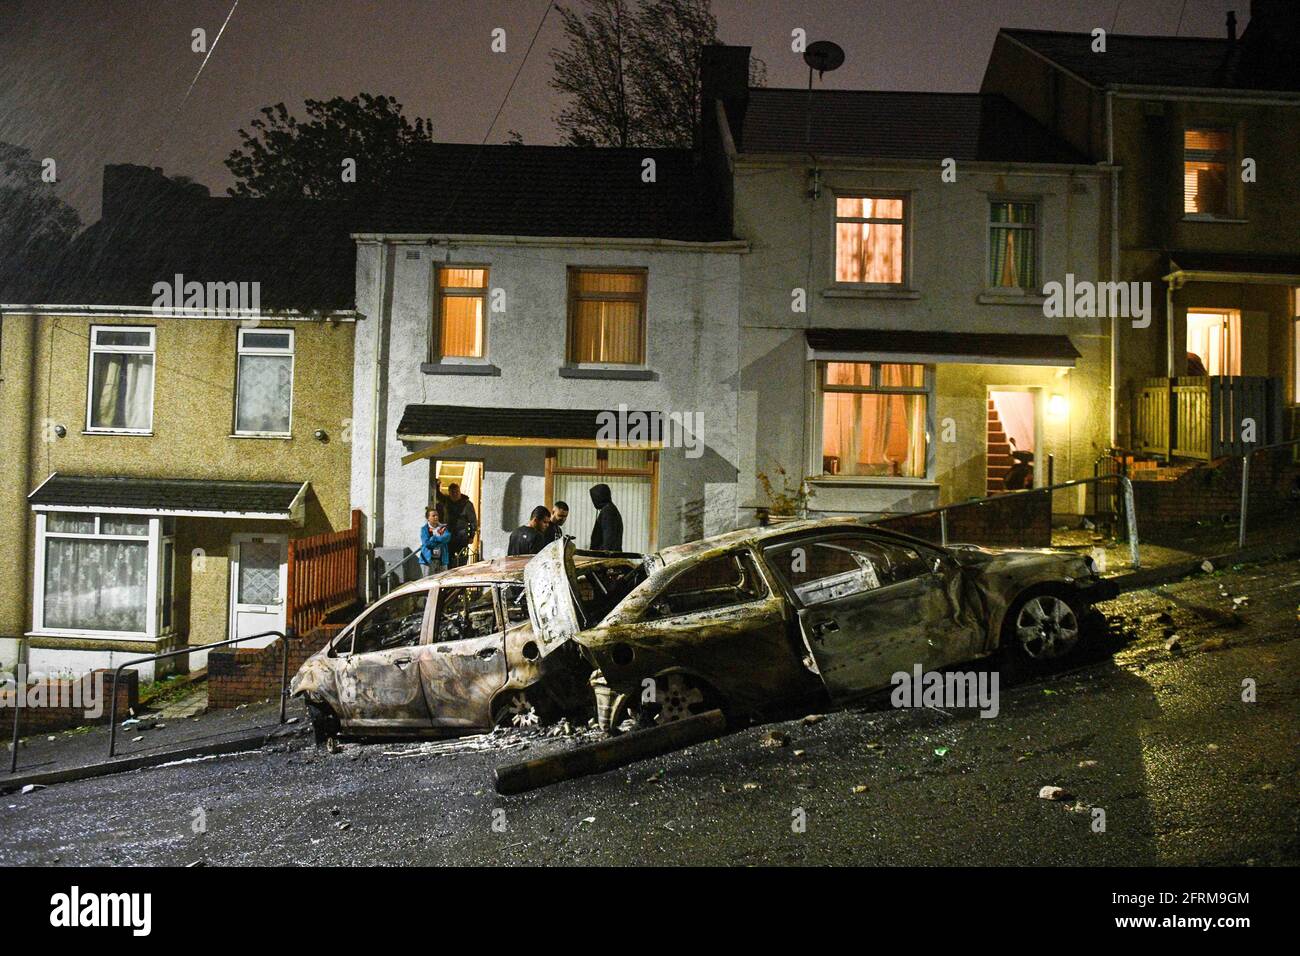 The aftermath of a riot in the Mayhill area of Swansea, which saw police attacked and several cars in the area torched during large scale disorder on the council estate. It is believed locals reacted when police turned up to a memorial that was taking place for a local man who had recently died. Stock Photo